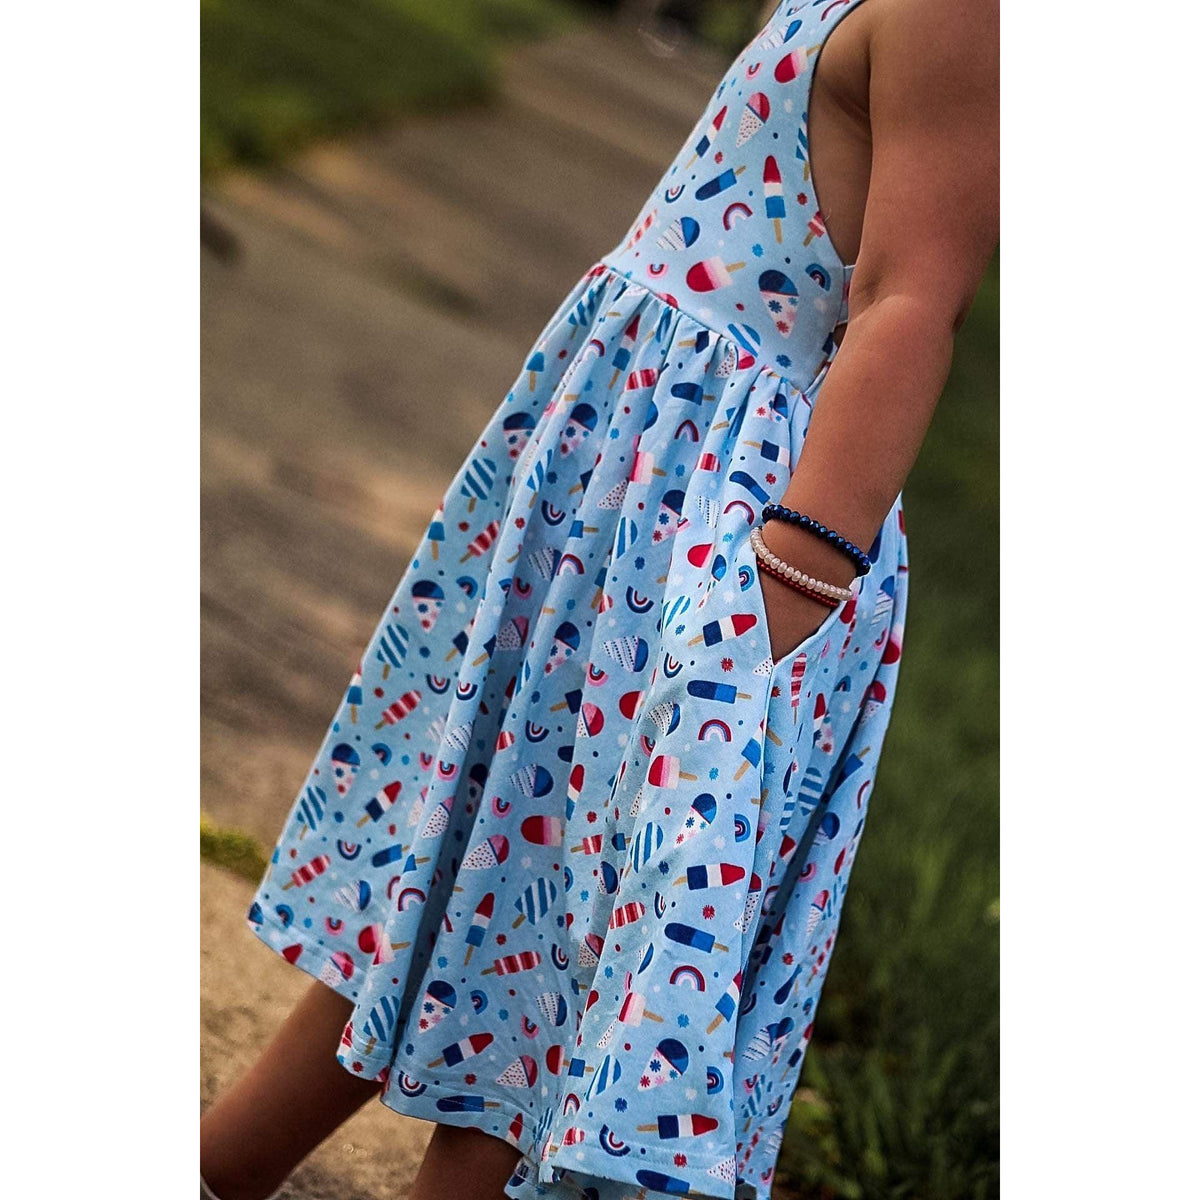 Ollie Jay | Sofia Dress in Patriotic Sweet Freedom | Kid's Red, White, and Blue Dress - becauseofadi